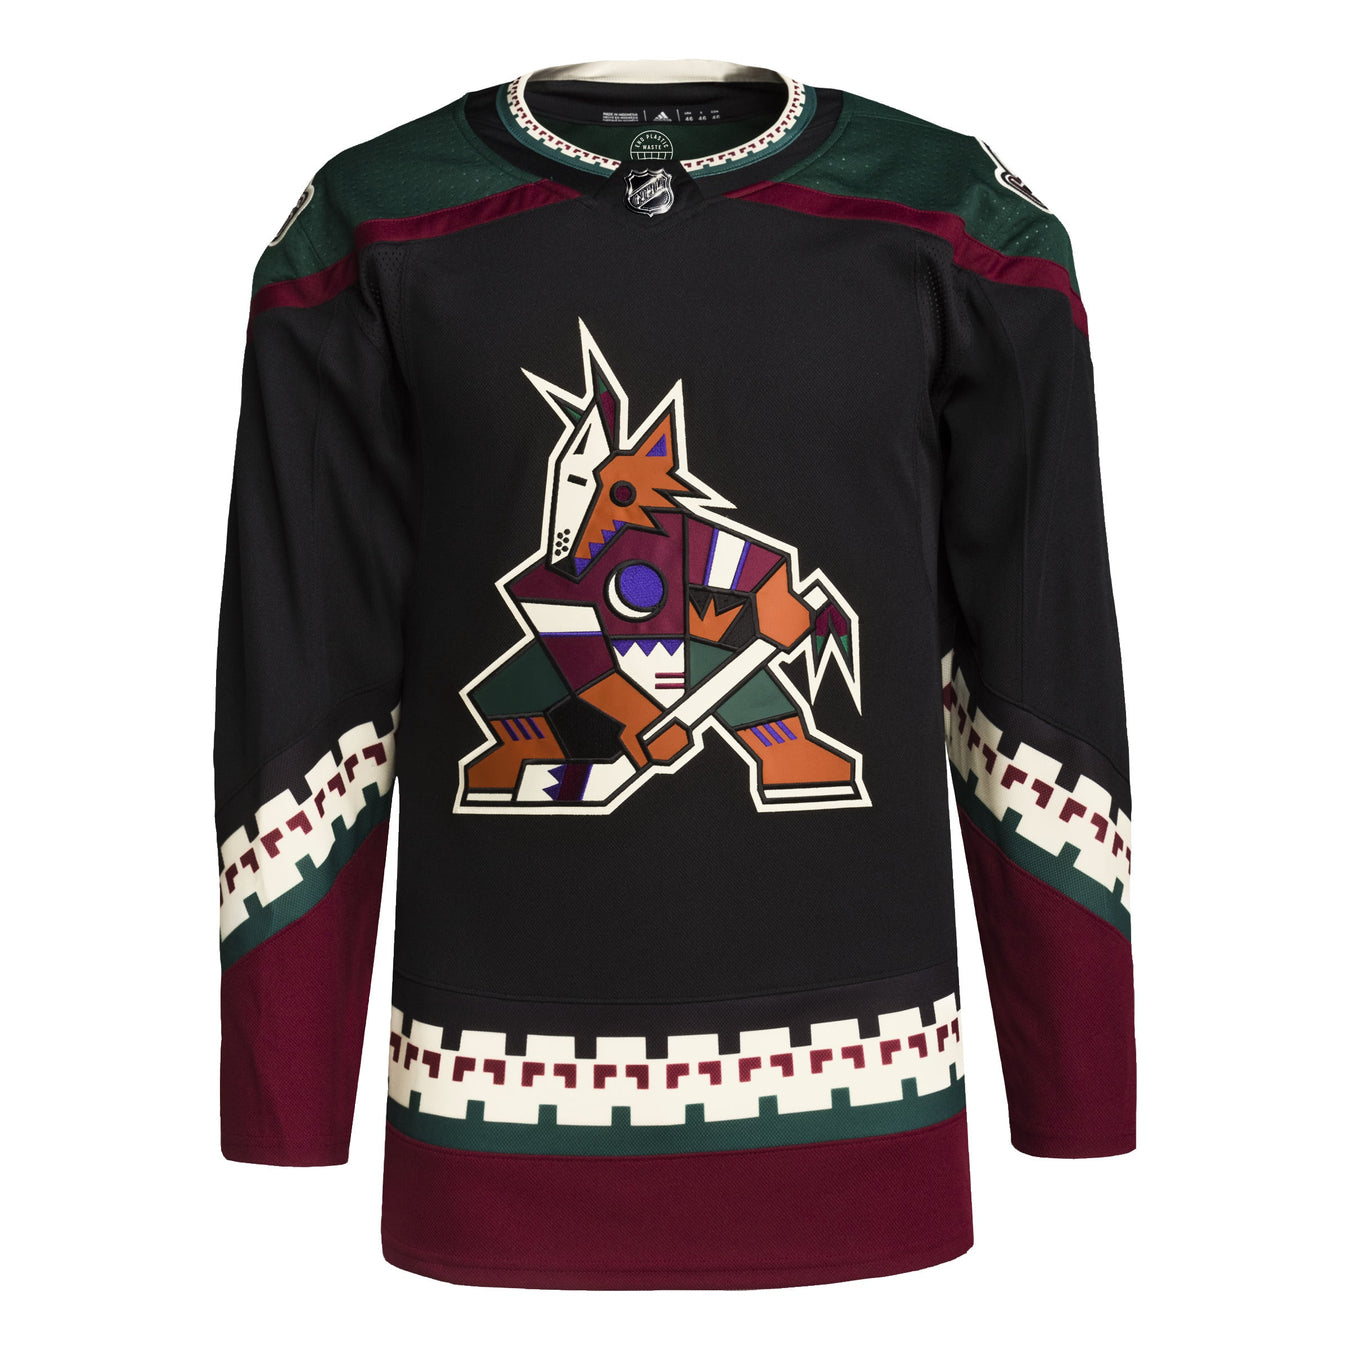 Arizona Coyotes NHL Official Licensed Merchandise